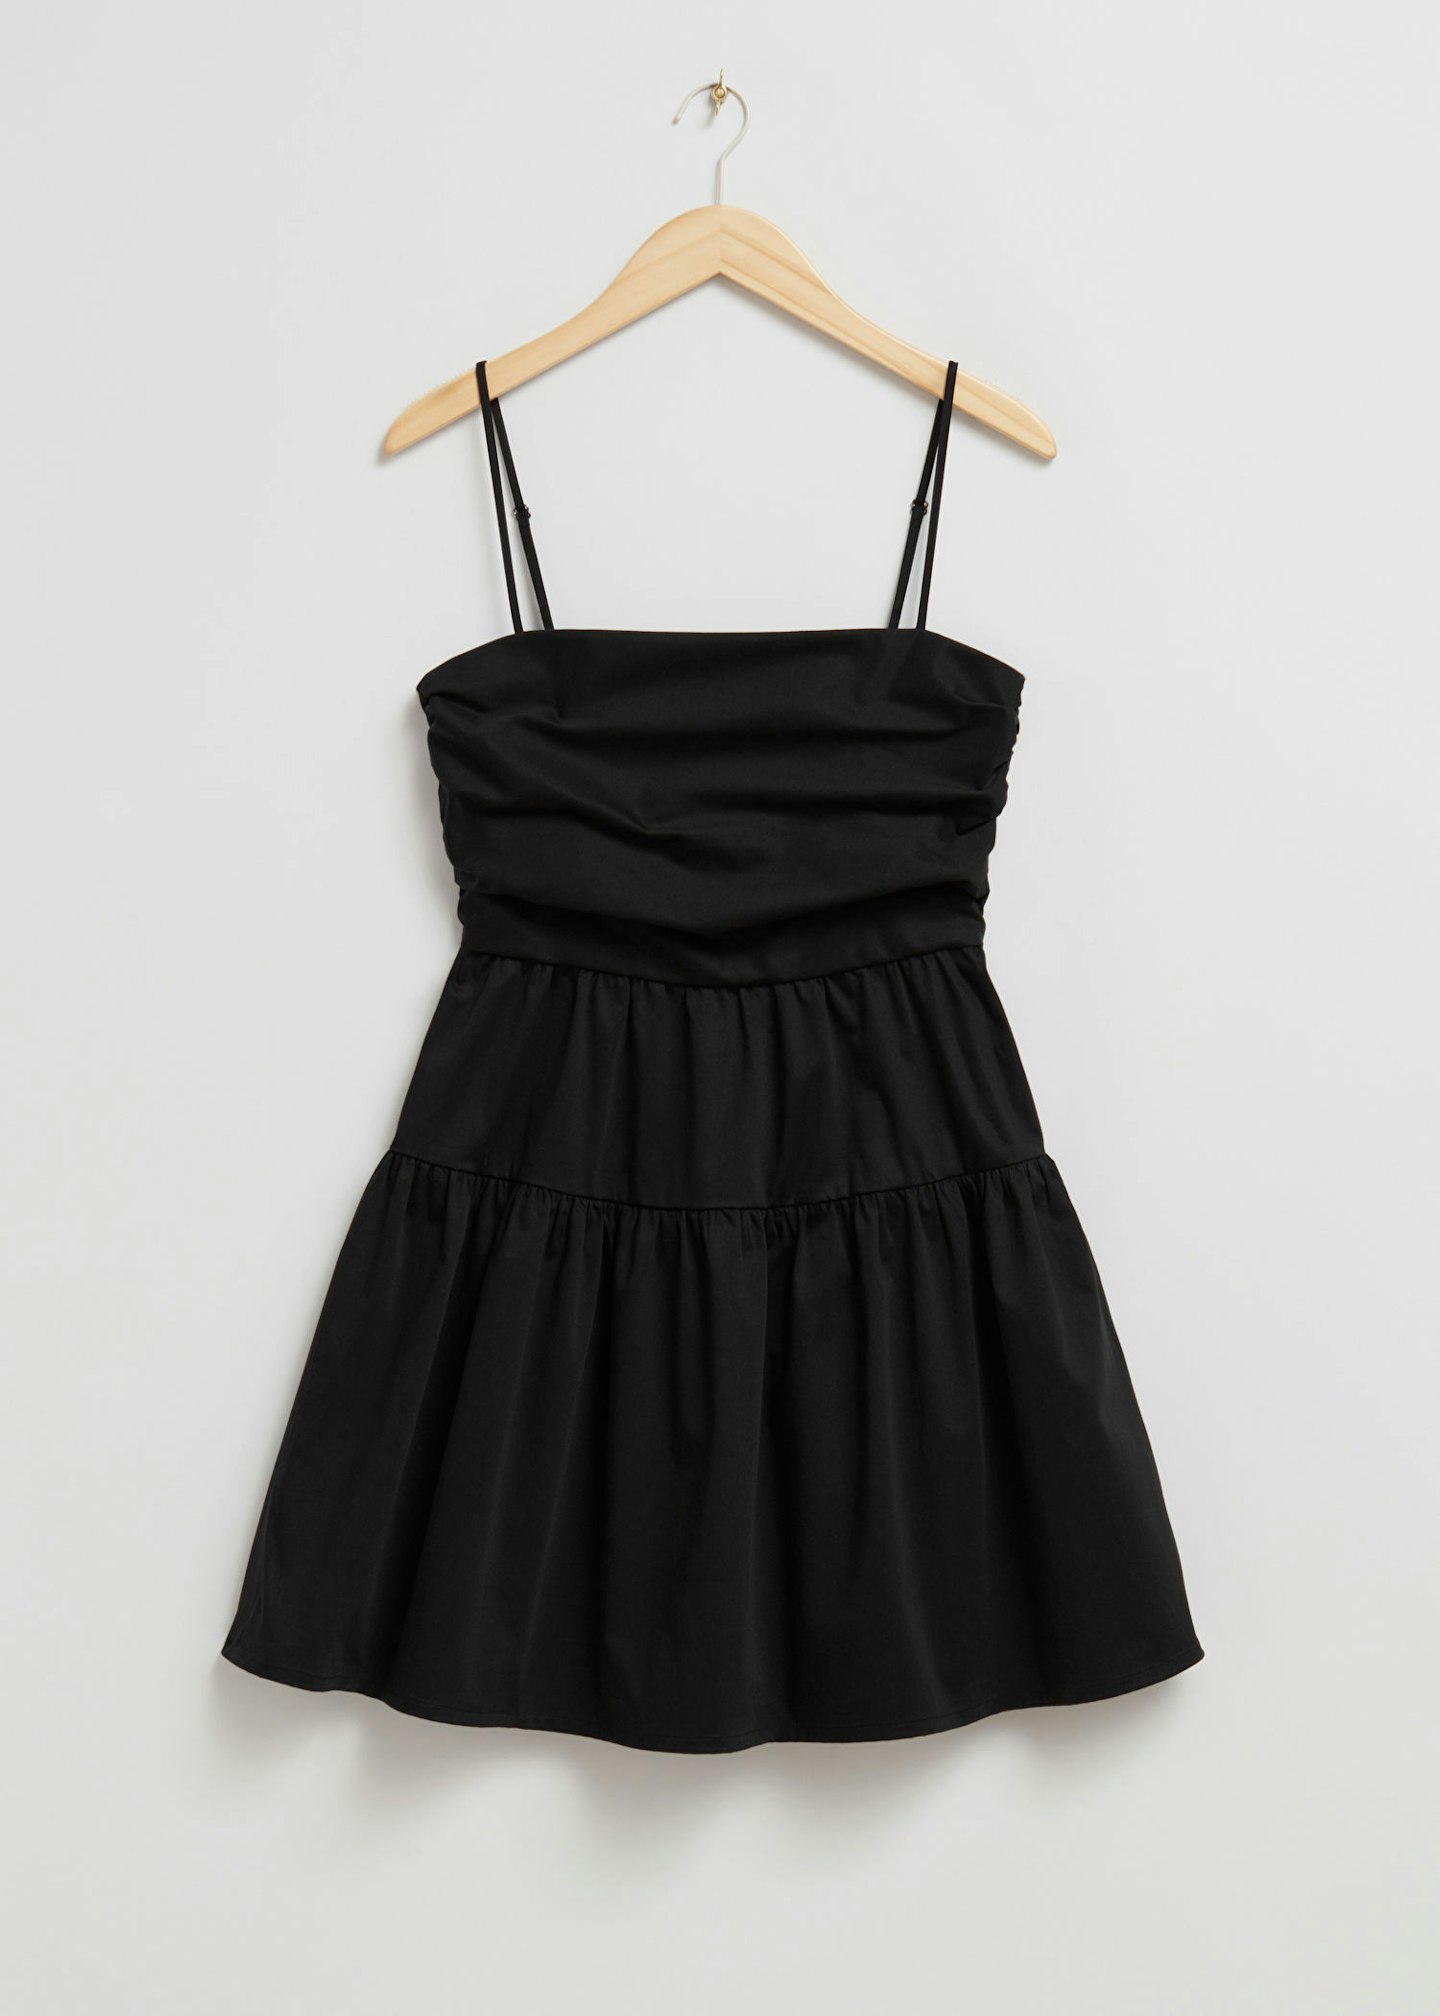 & Other Stories, Babydoll Pleated Bodice Dress